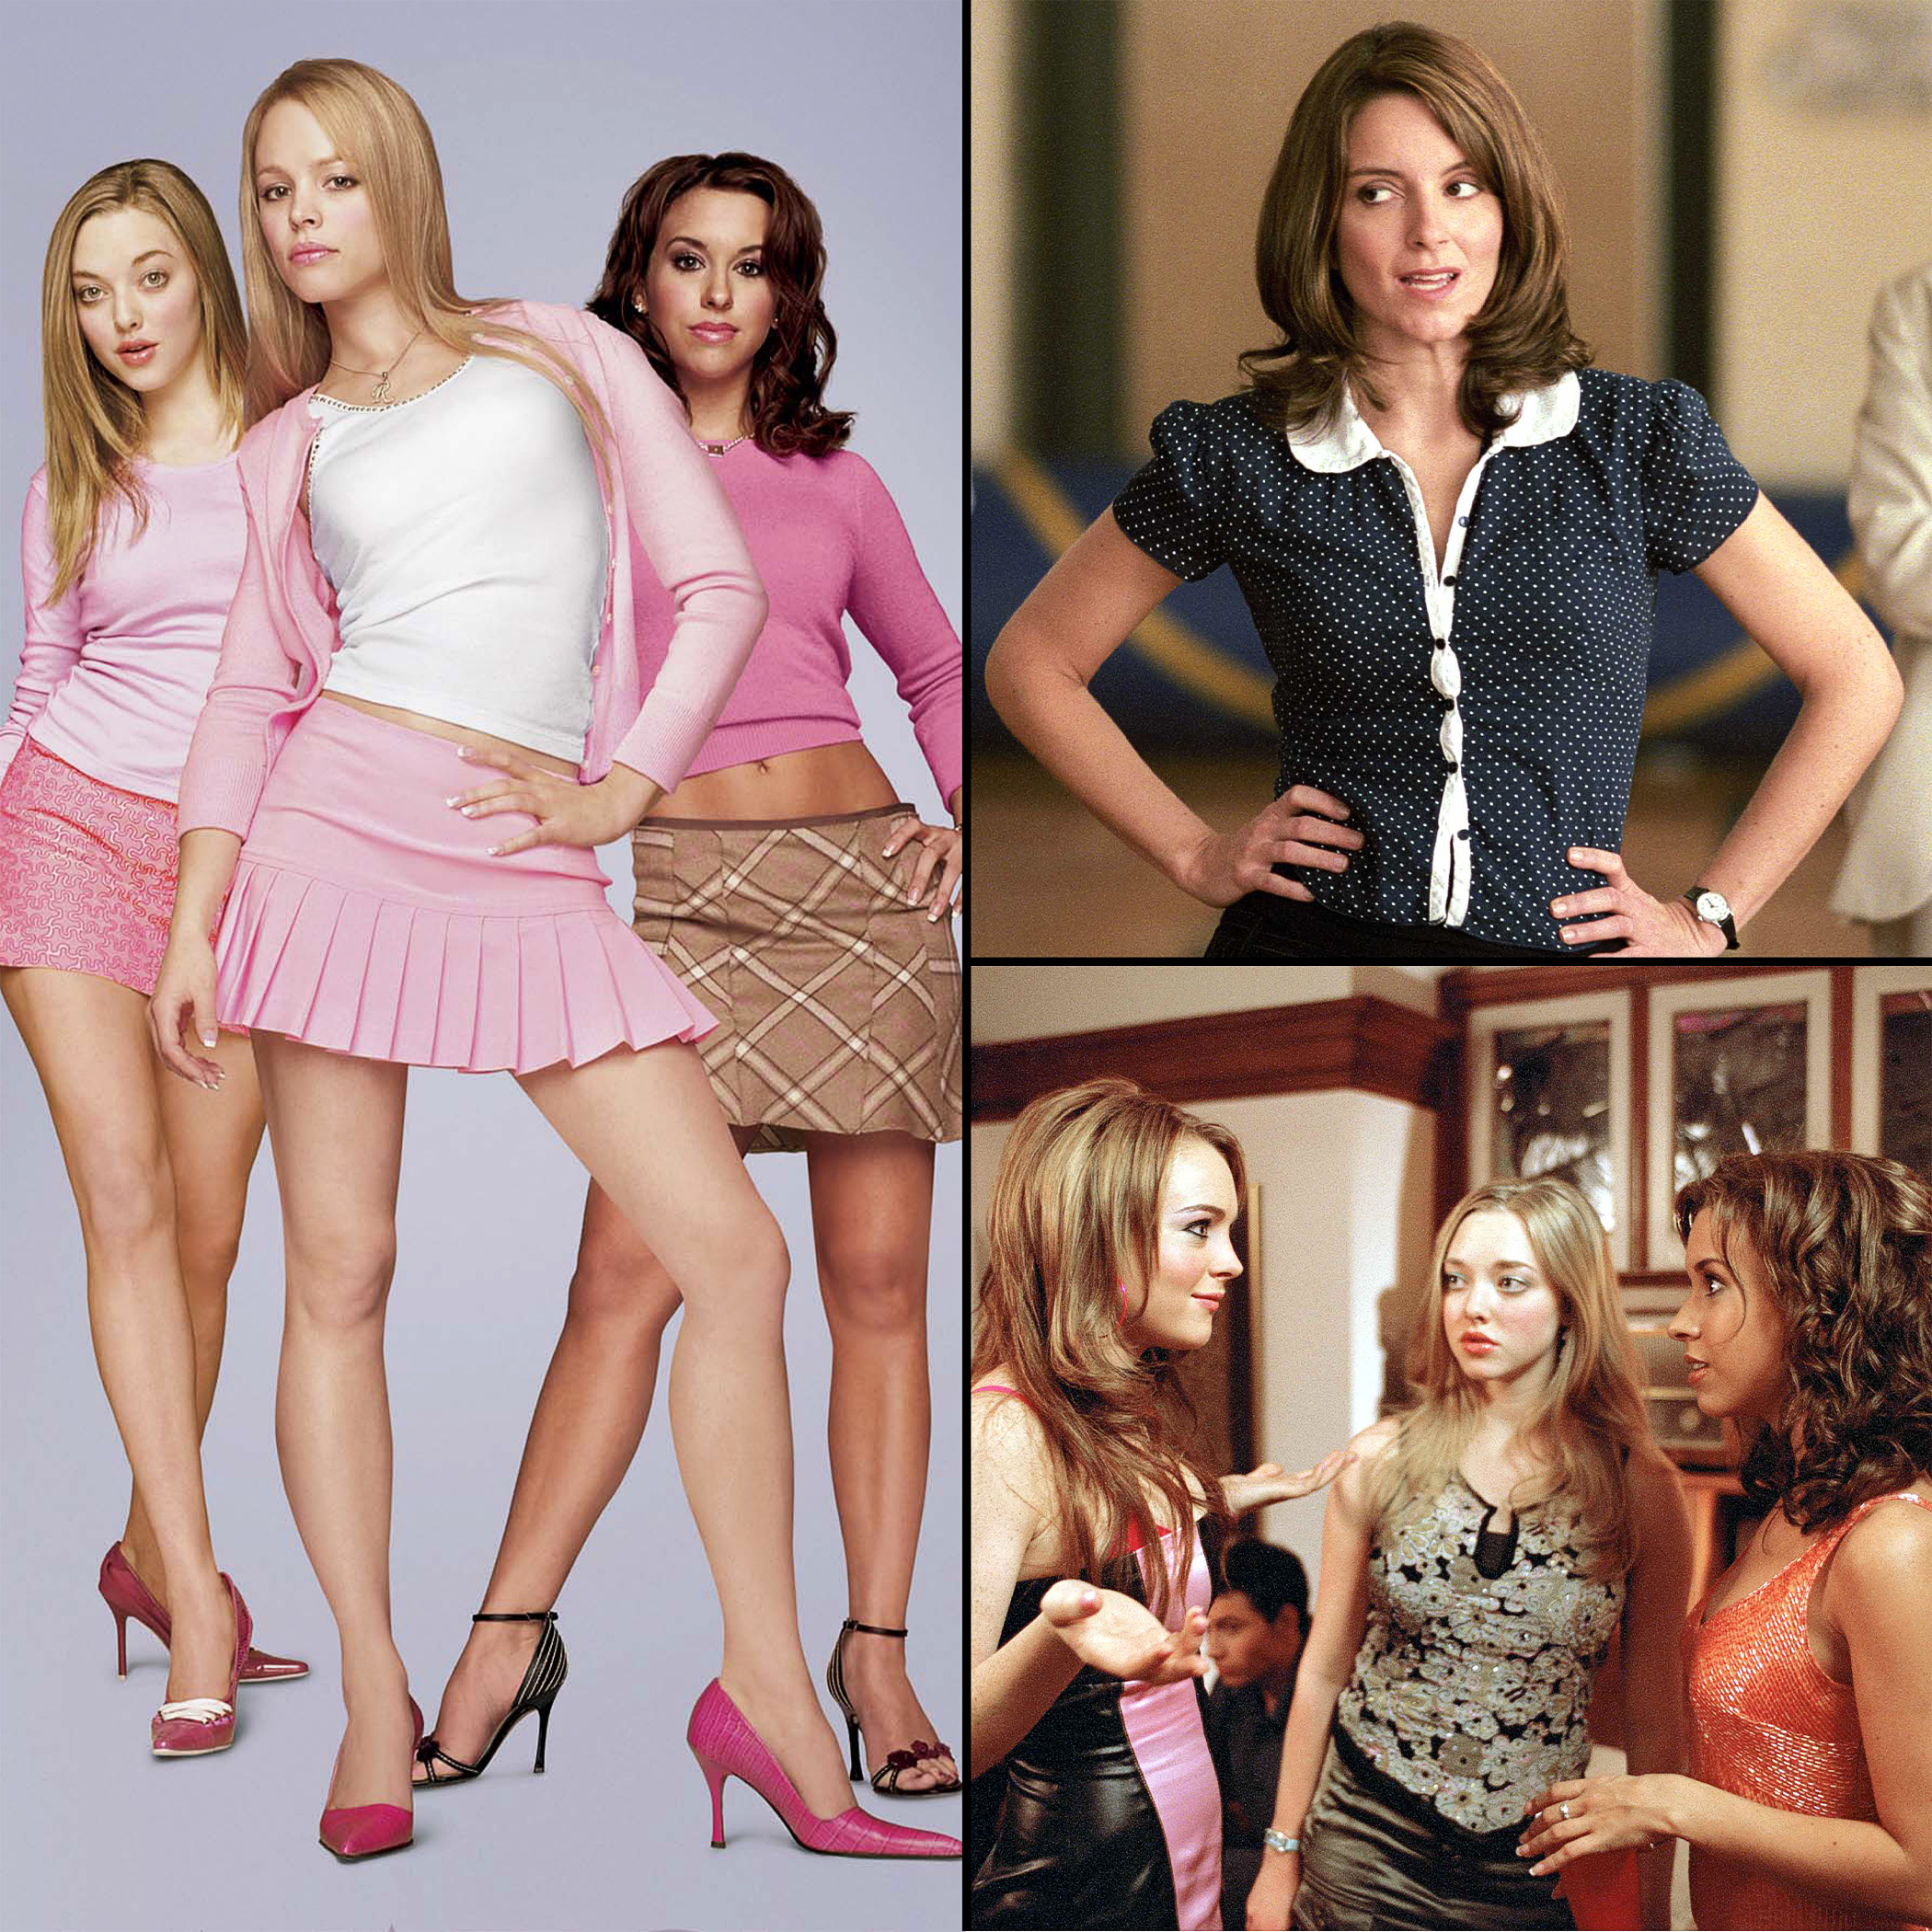  Mean Girls 2 : Movies & TV